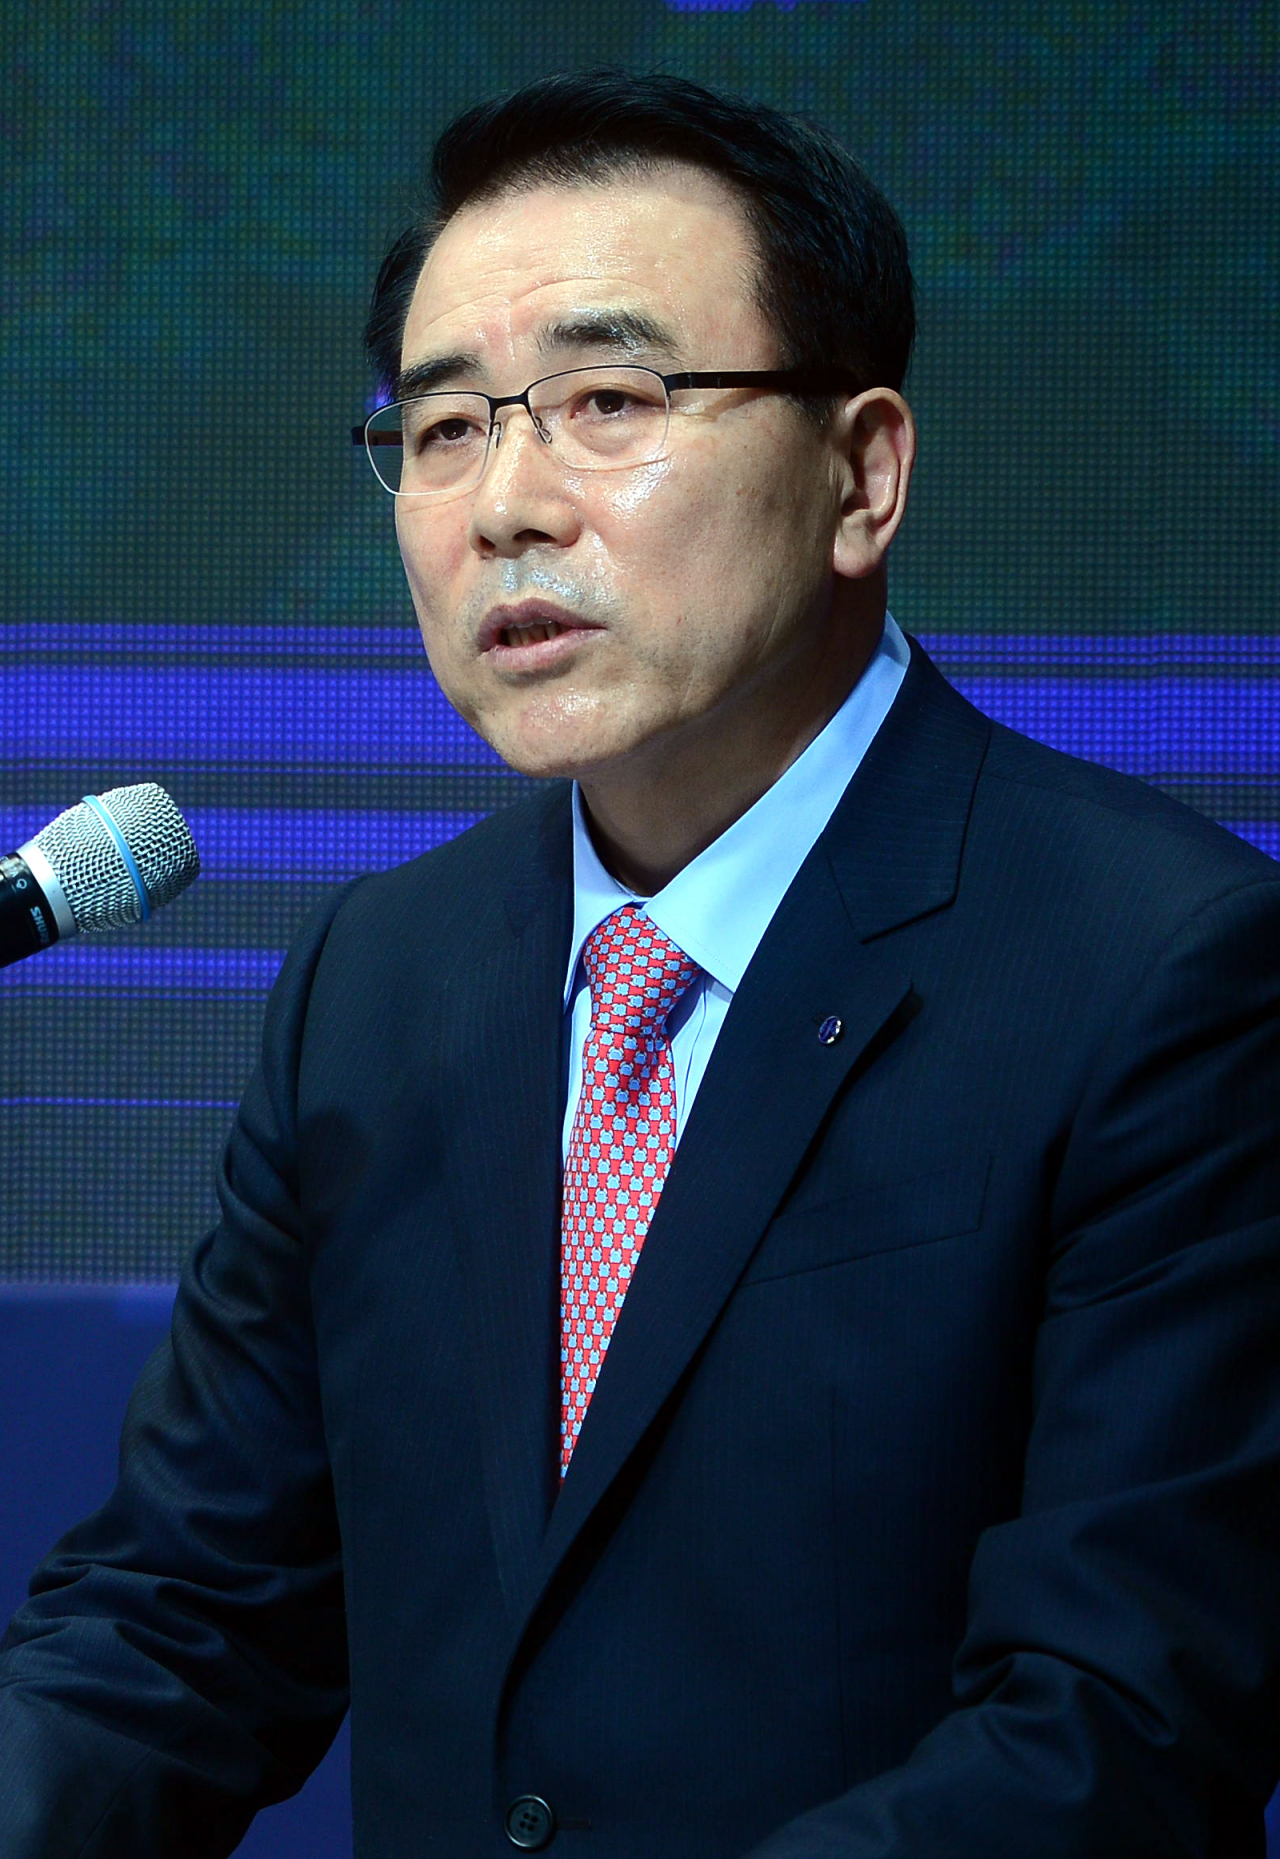 Cho Yong-byoung, the former chairman of Shinhan Financial Group, delivers a speech during the inauguration ceremony for the chairman of Shinhan Financial Group at the bank's headquarters in Seoul in 2017. (Newsis)